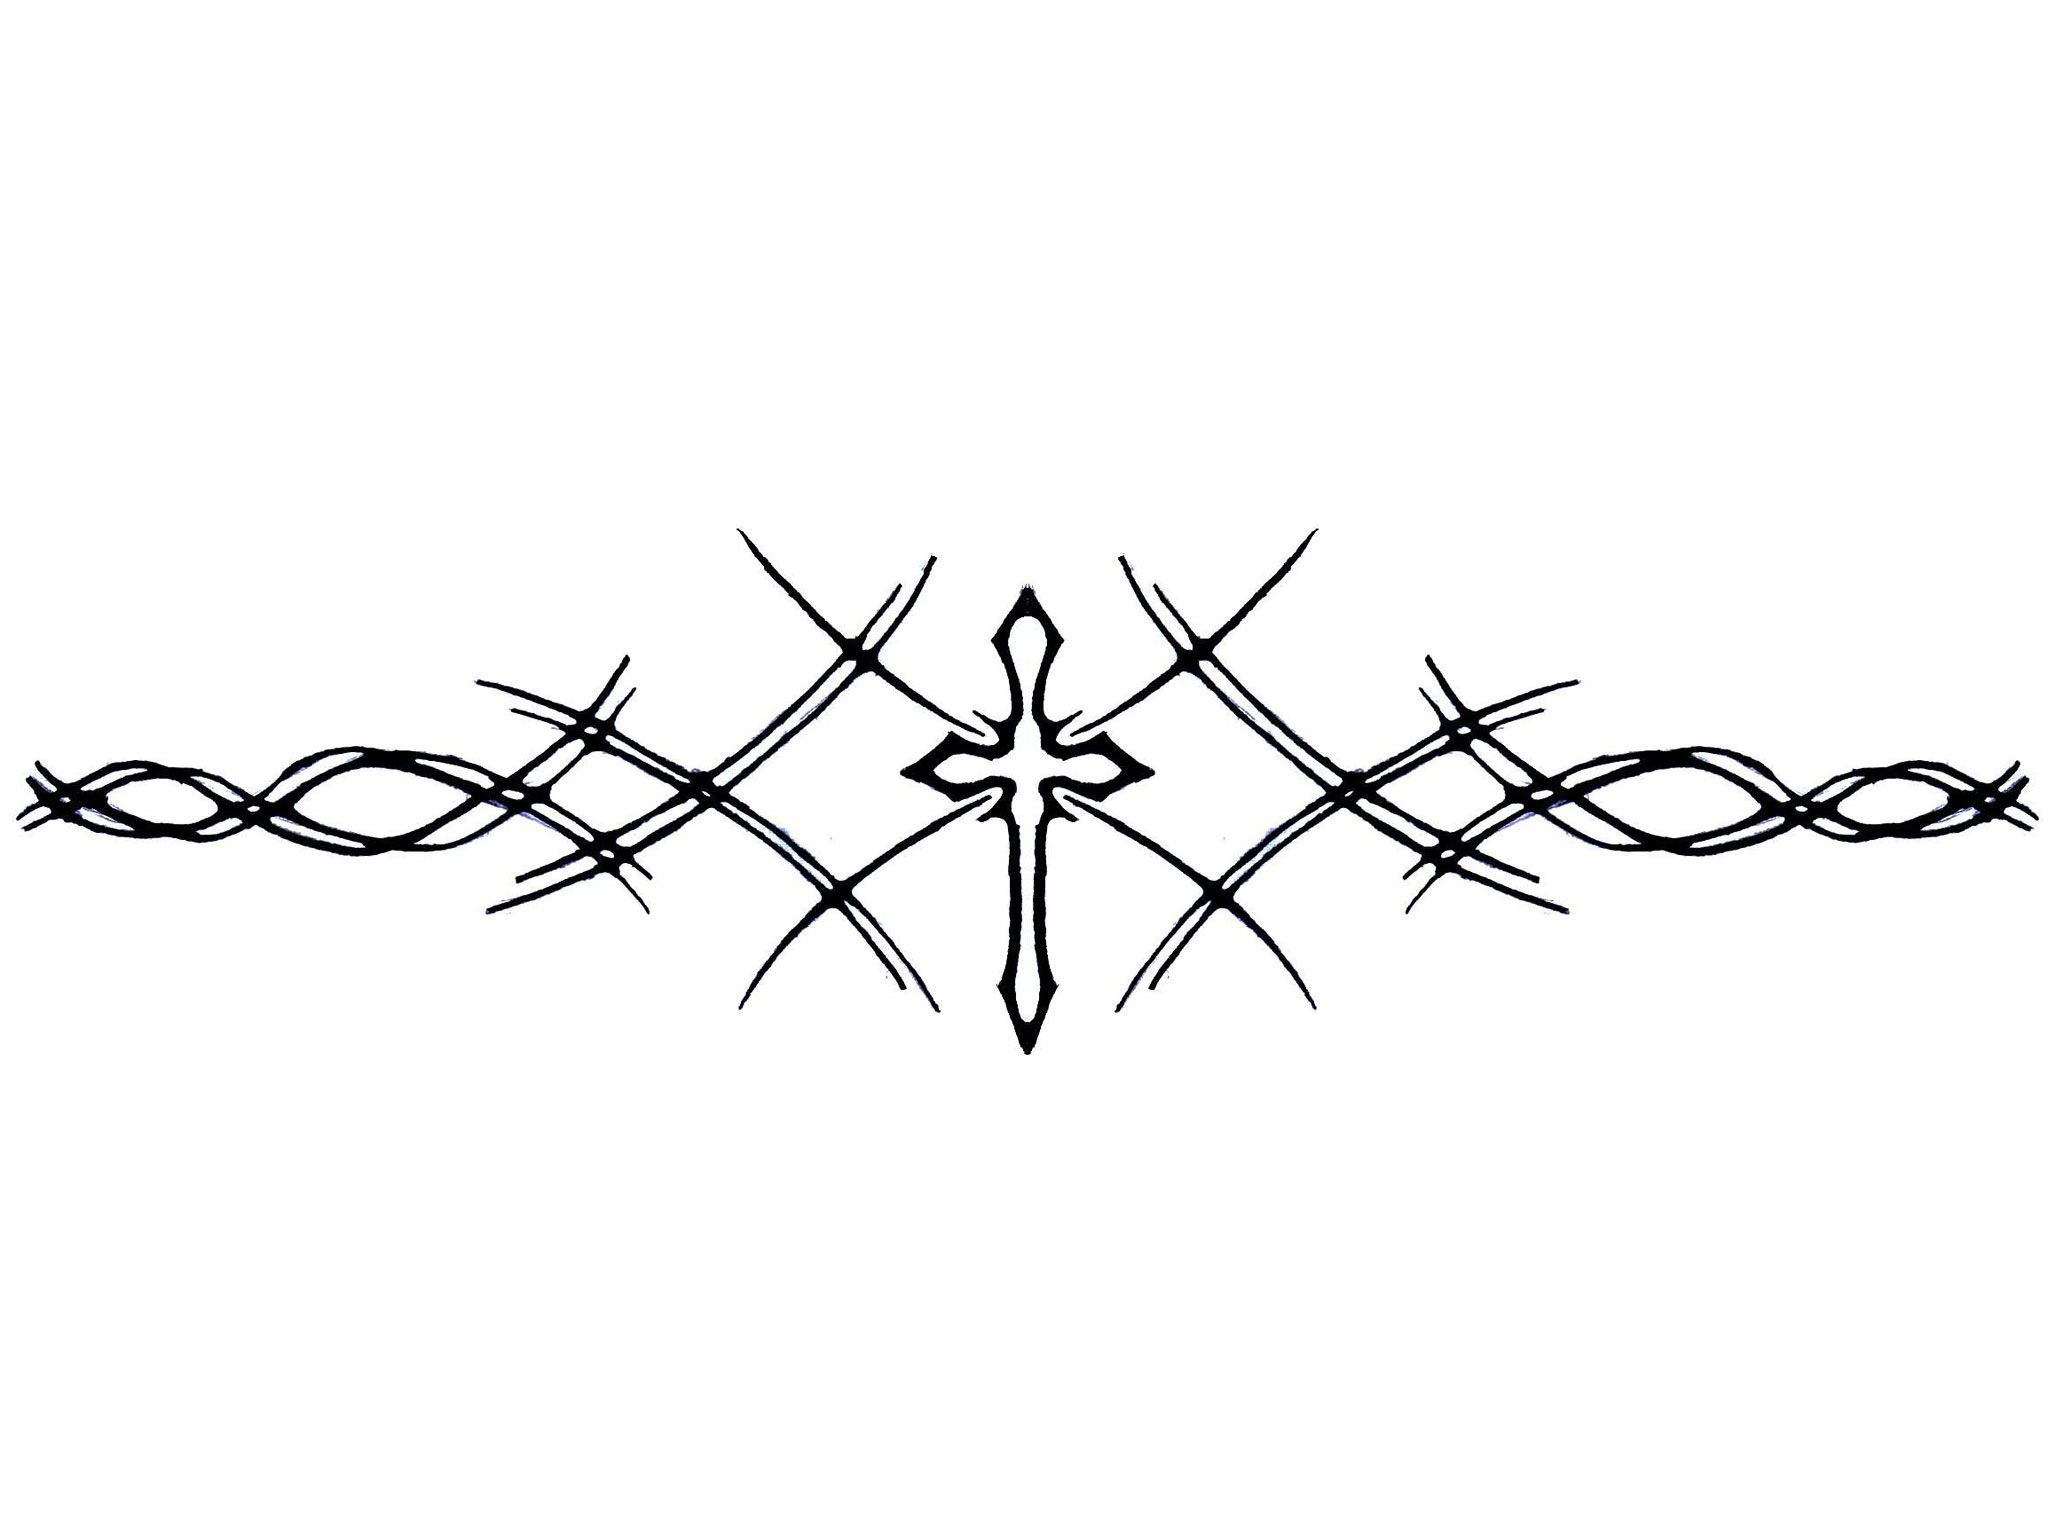 Armband Cross Tattoo Wallpaper Just For Me Arm Band Tattoo within dimensions 2048 X 1536